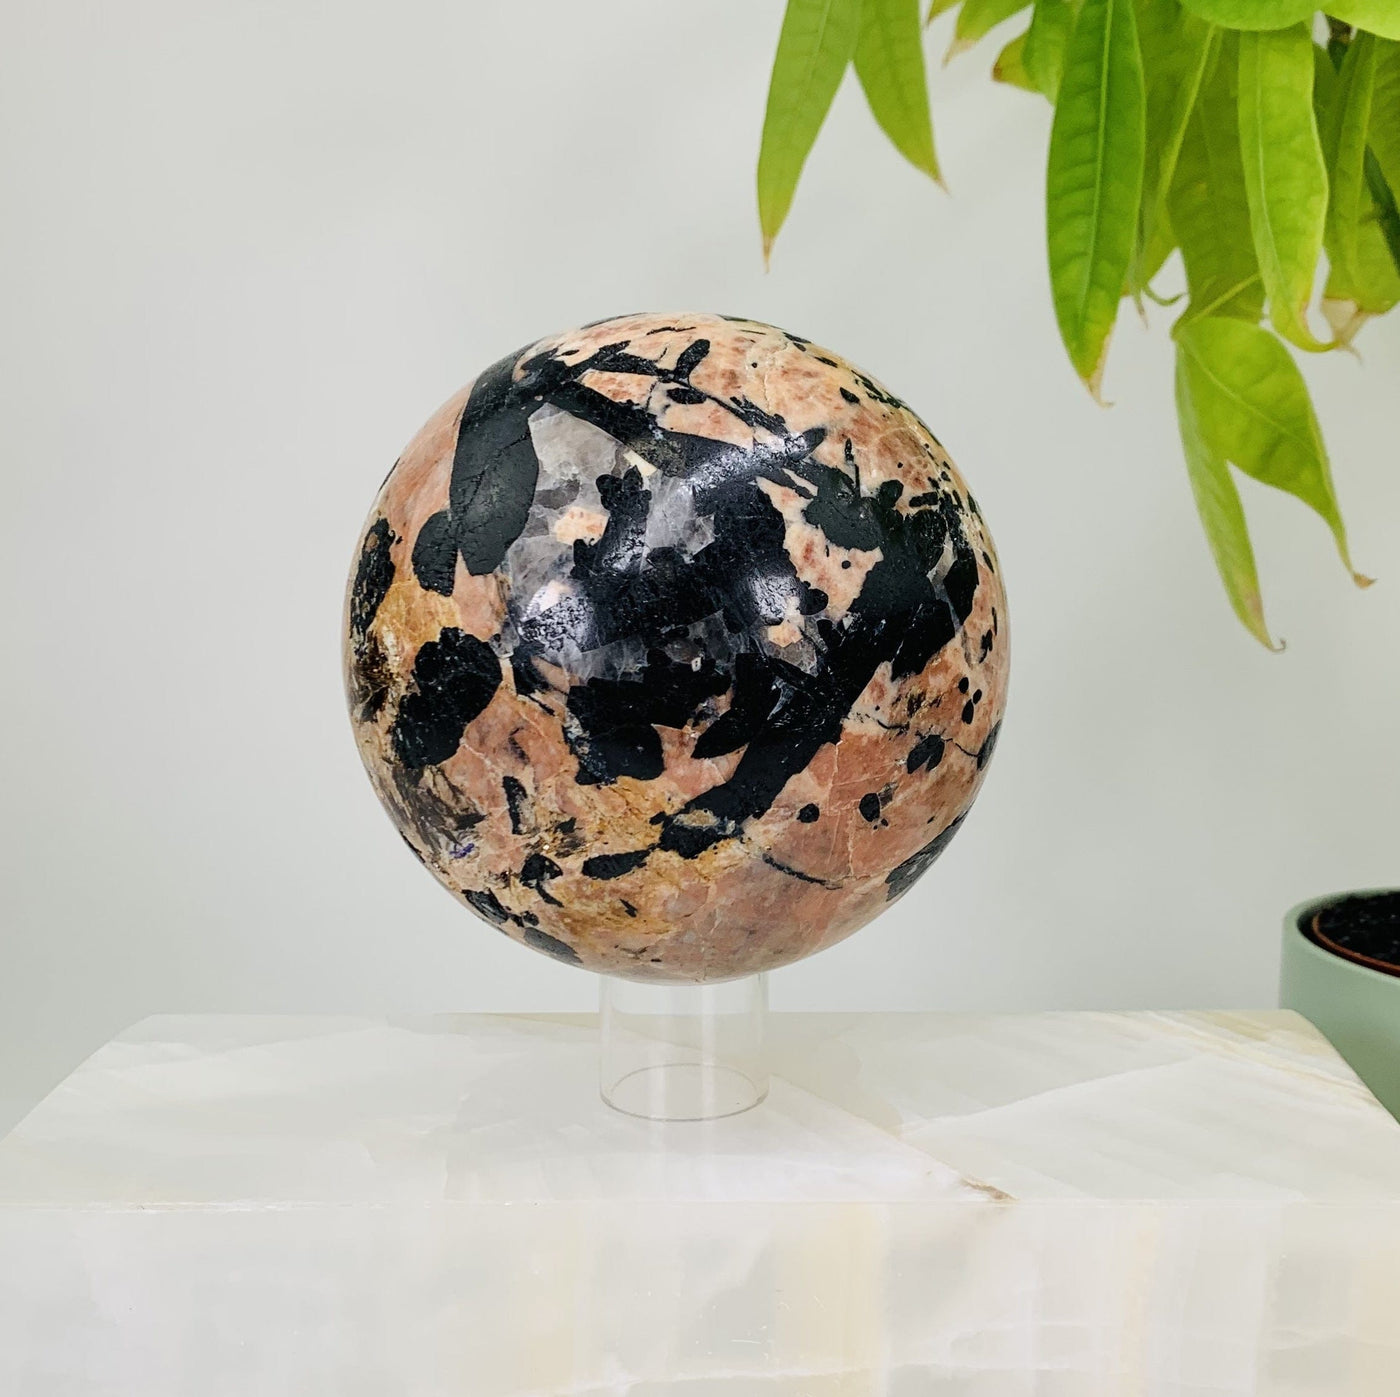 Picture of the Front side of Black tourmaline with feldspar sphere, Picture is mainly focusing on the Black tourmaline formations in the sphere. The sphere is also being displayed on a white back ground next to a green natural plant. 